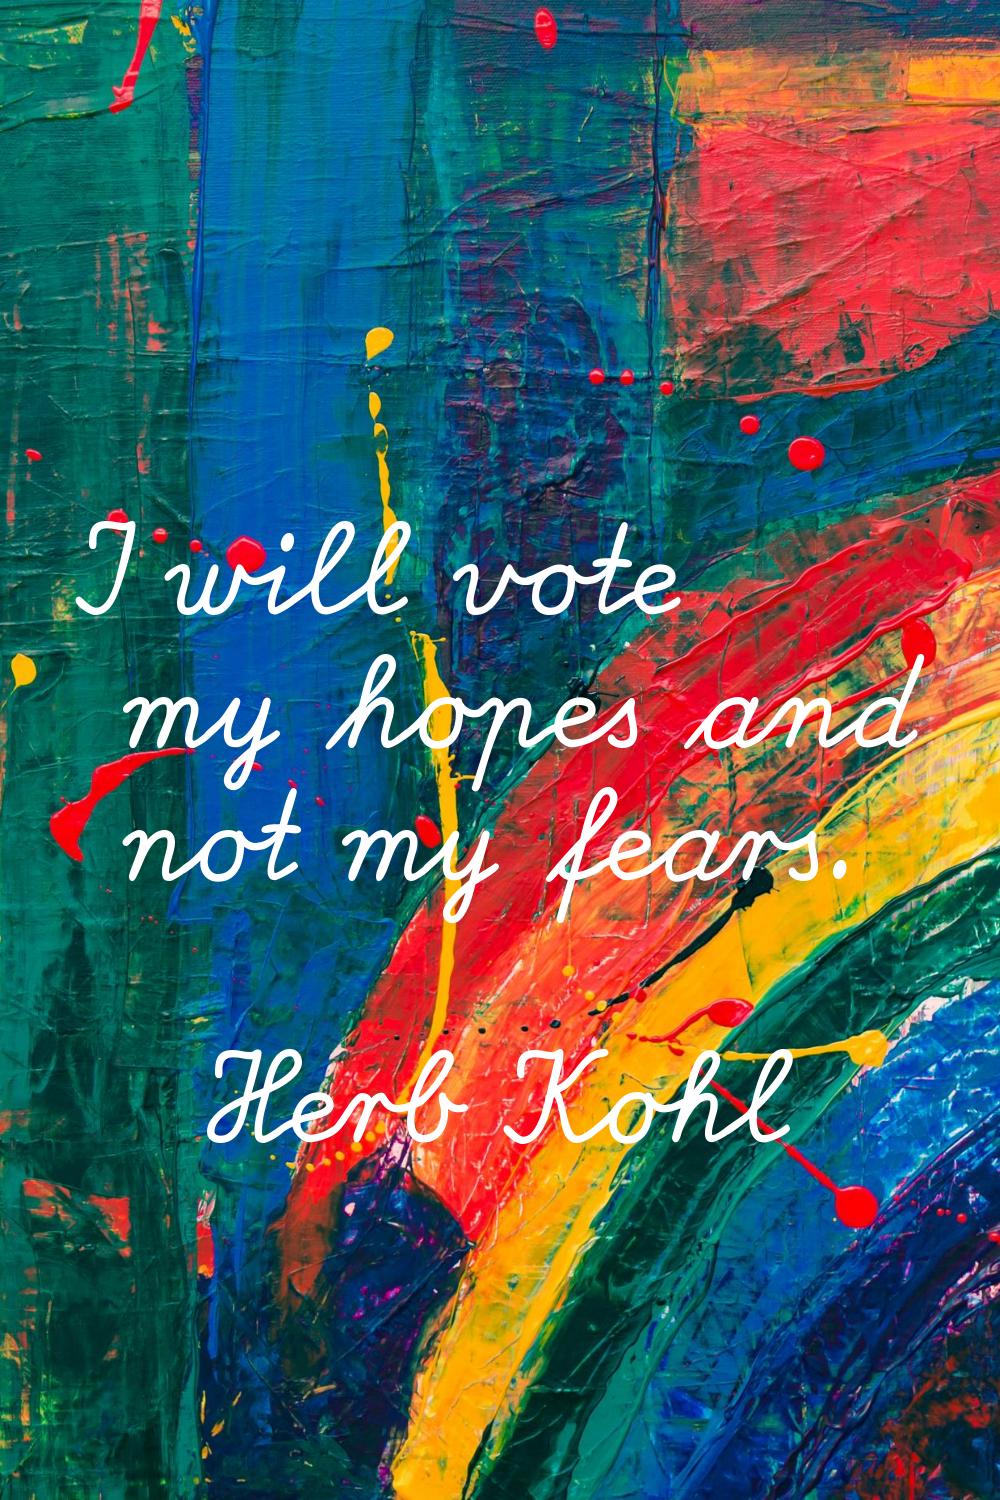 I will vote my hopes and not my fears.